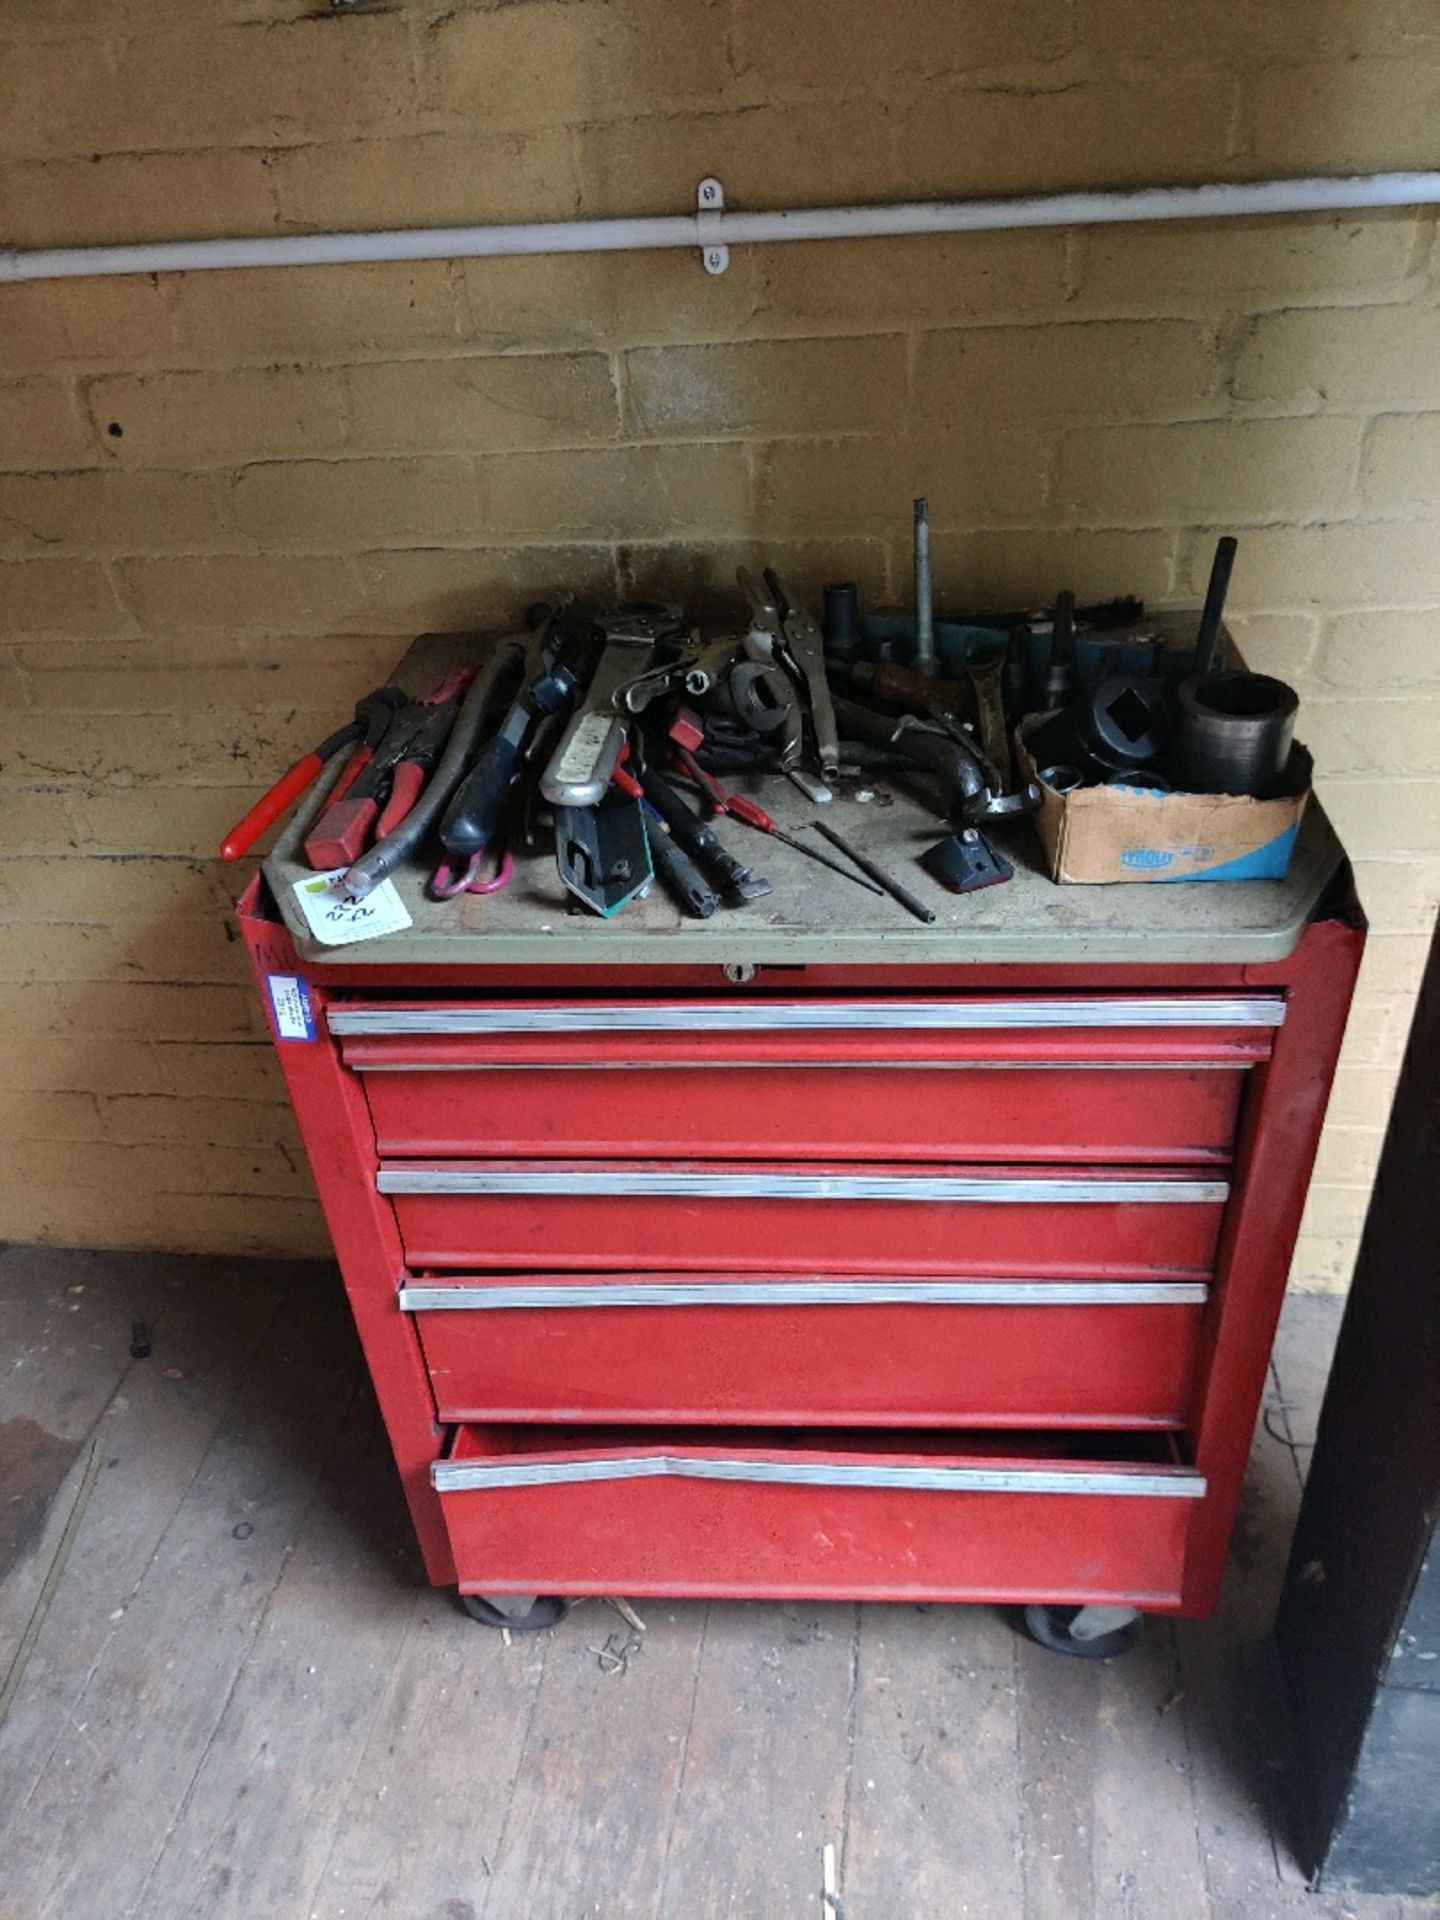 Tool boxes